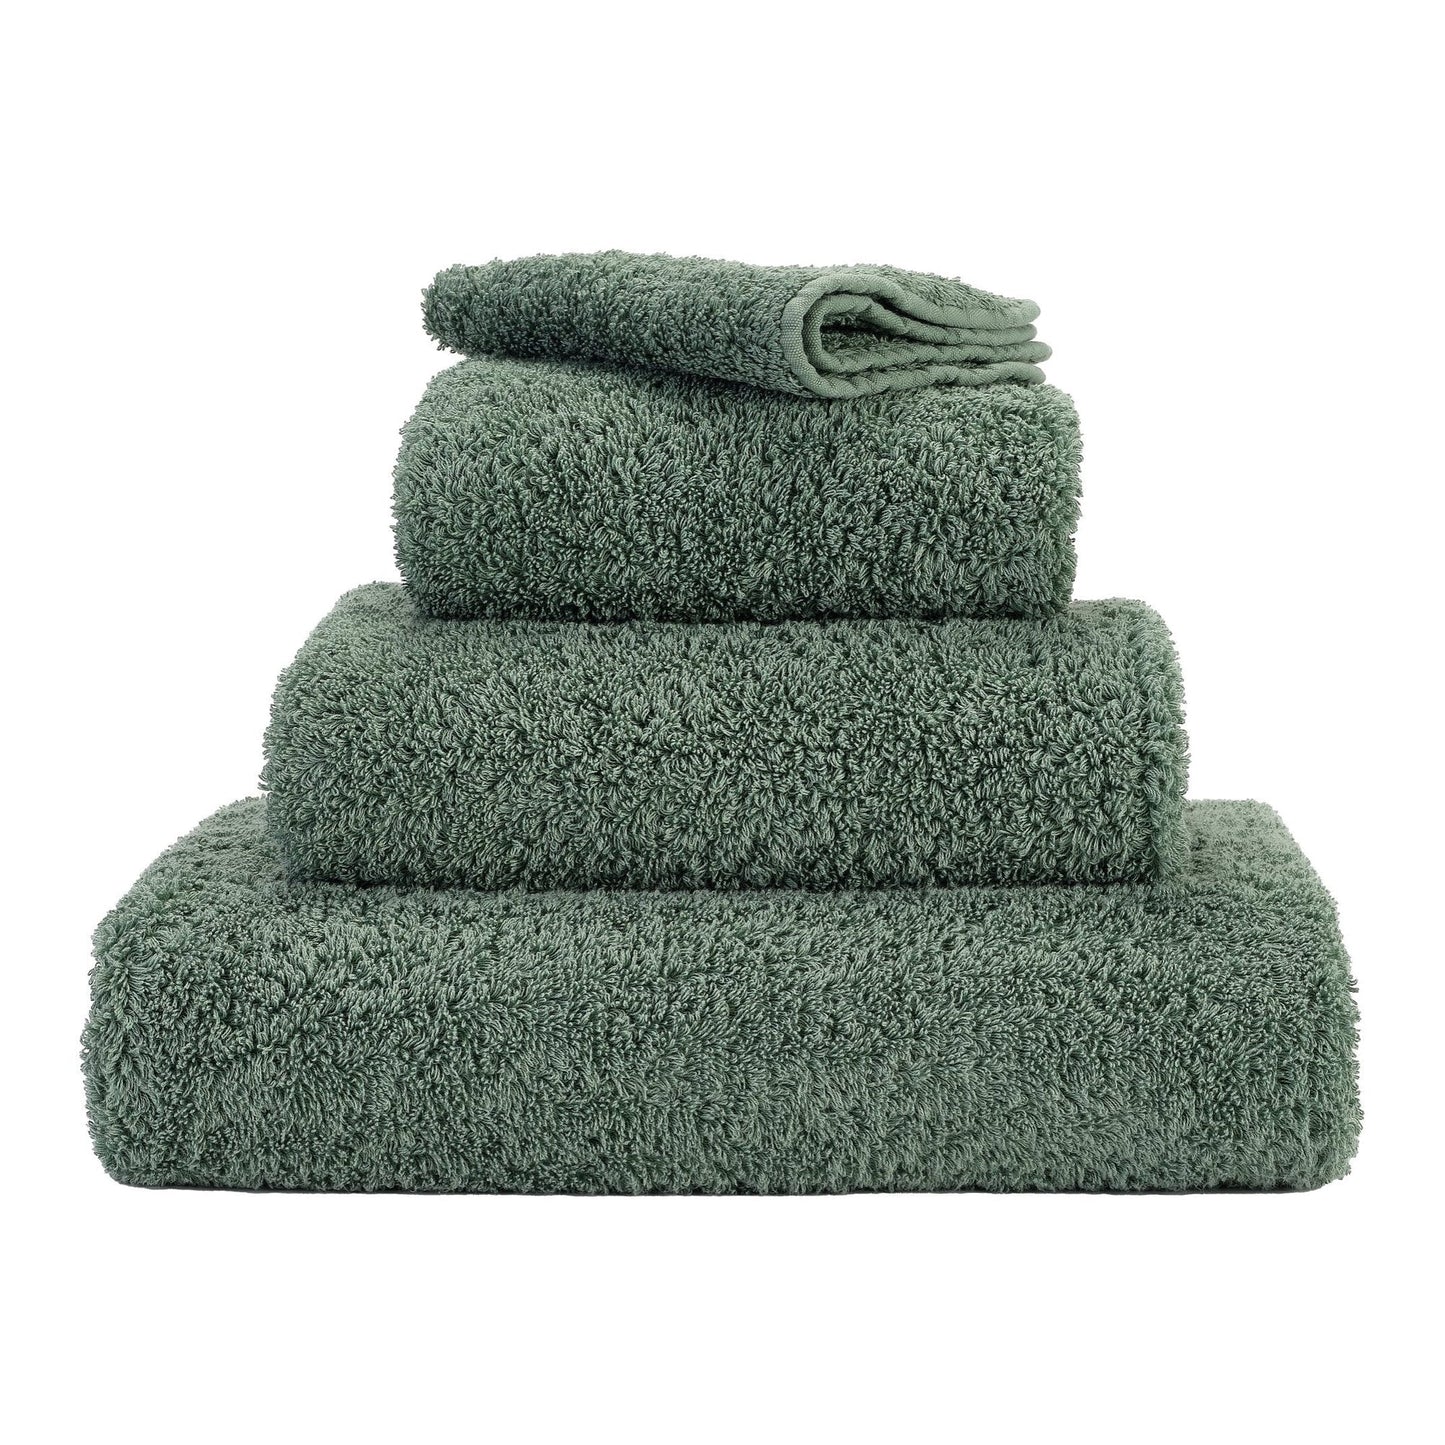 Luxury Super Pile Egyptian Cotton Towel by Abyss & Habidecor | 280 Evergreen - |VESIMI Design| Luxury and Rustic bathrooms online